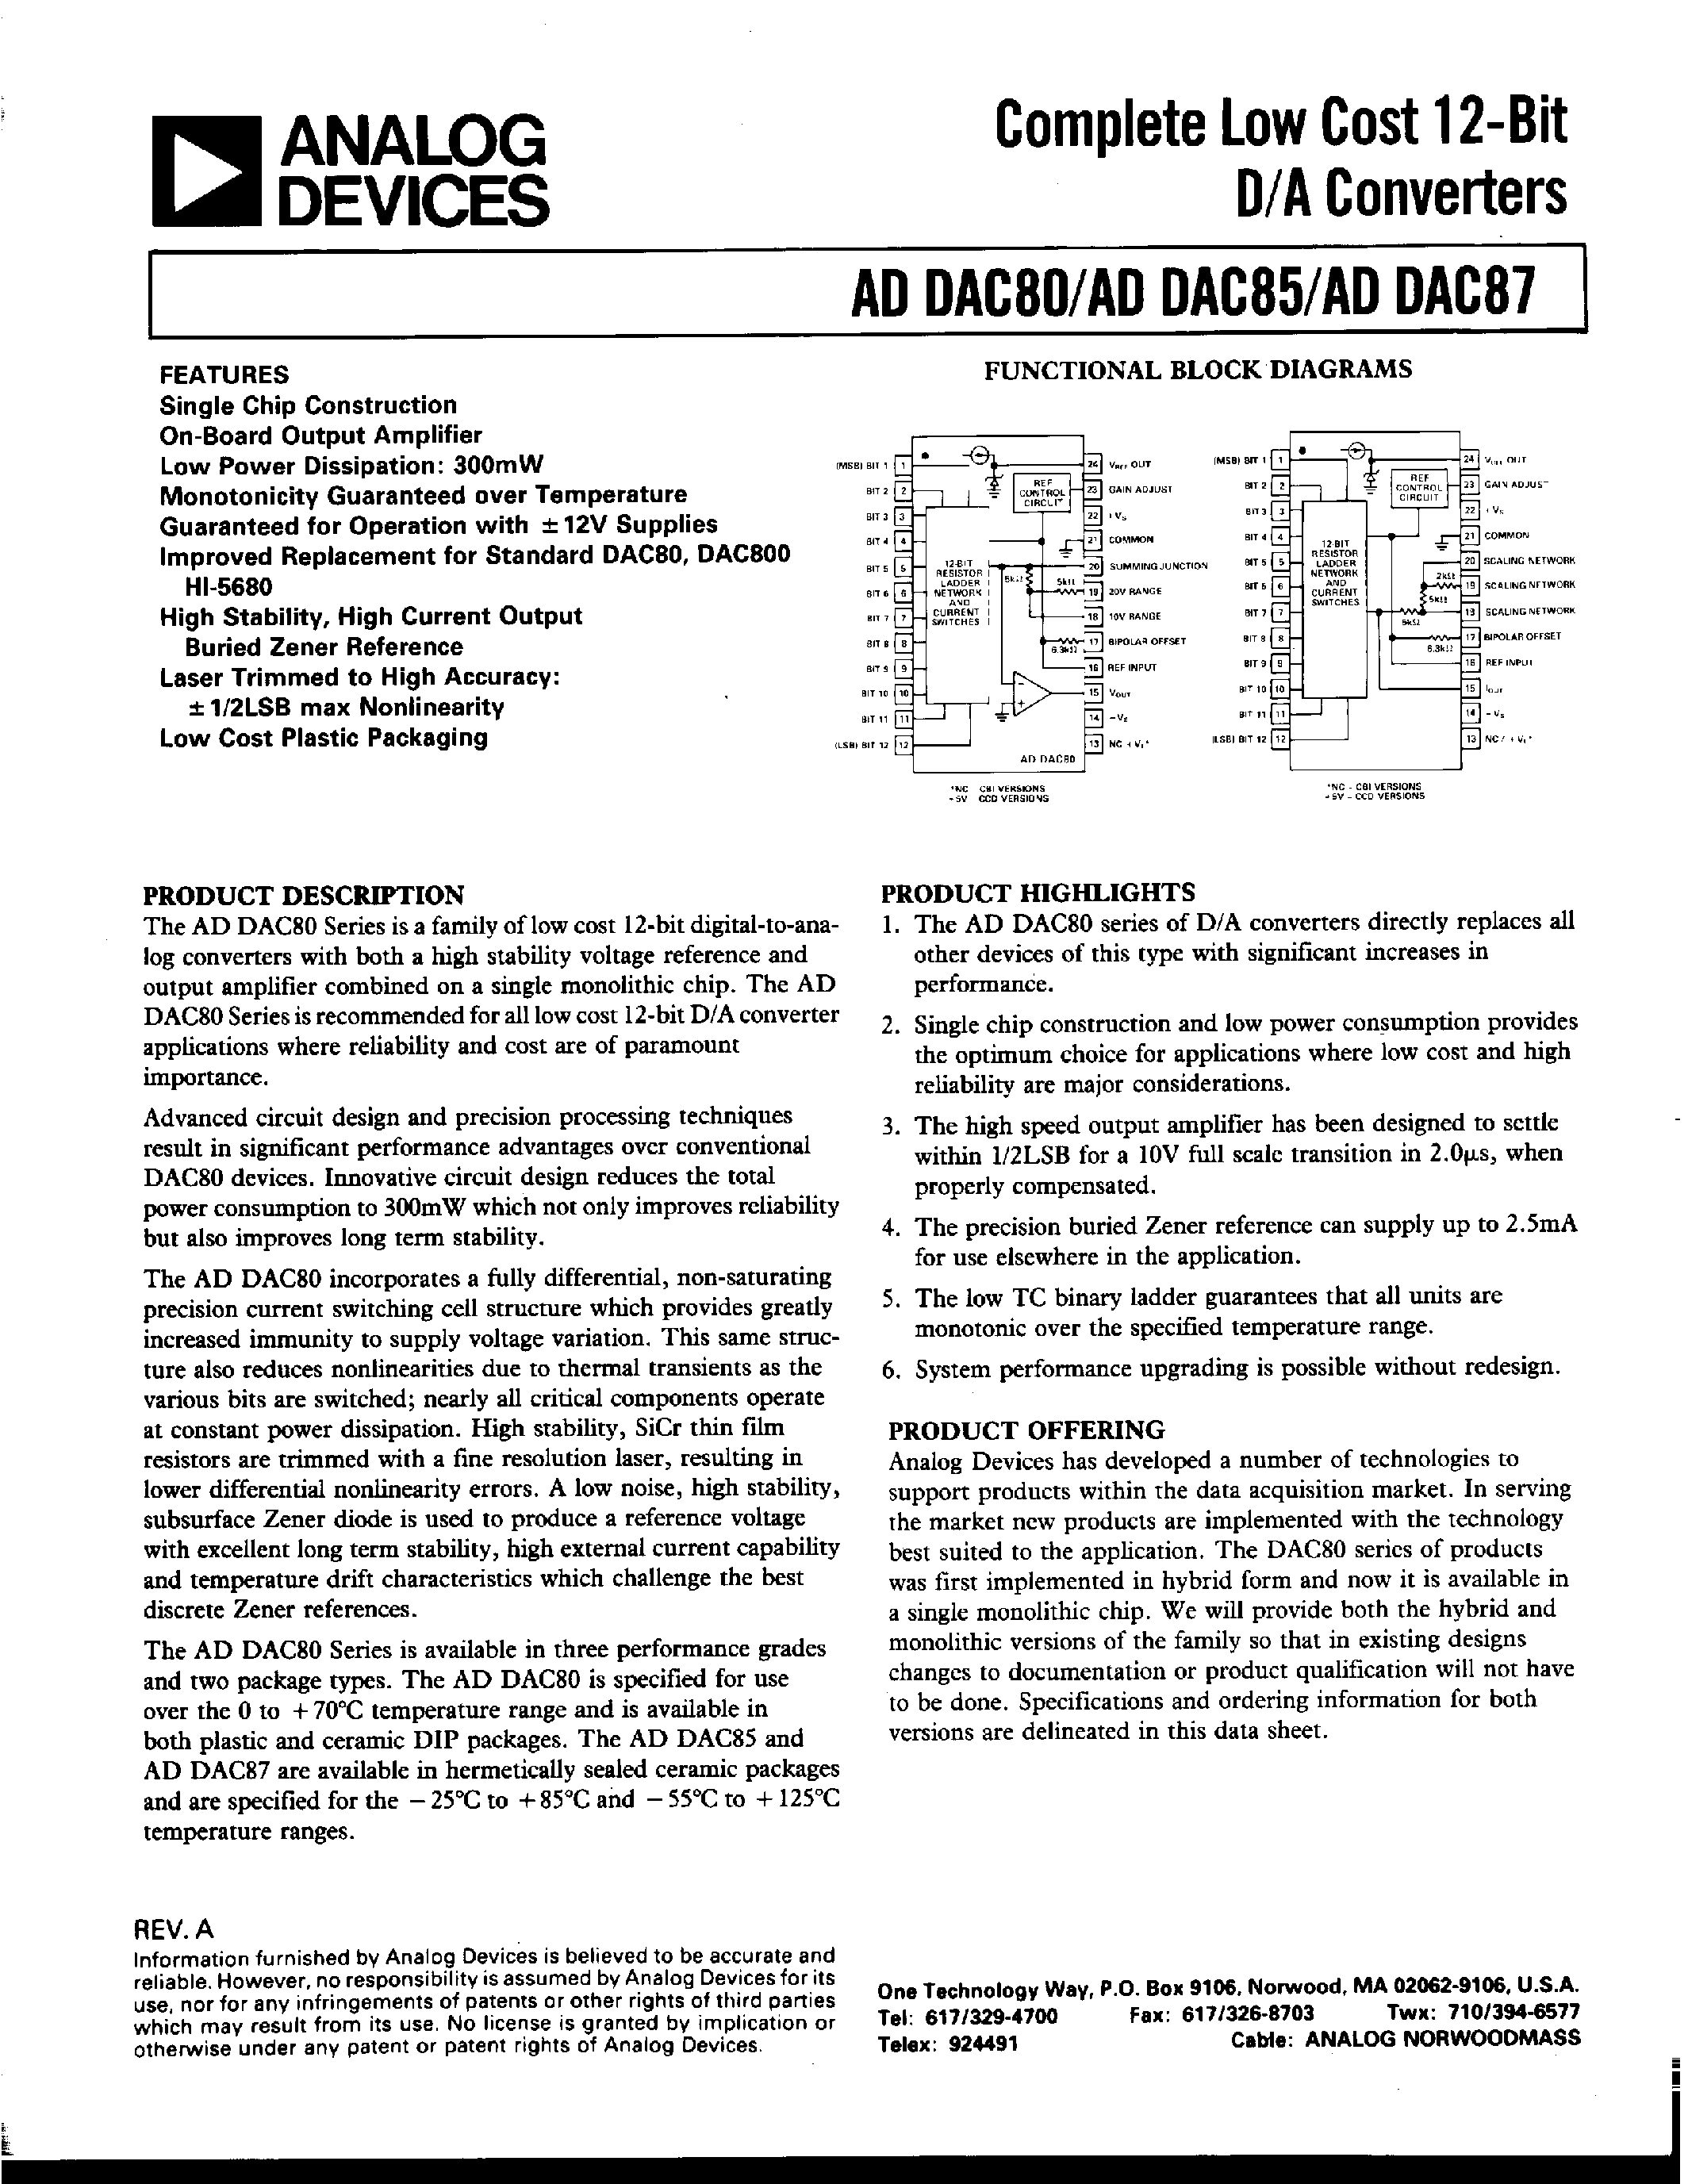 Datasheet ADDAC80-CCD-V - COMPLETE LOW COST 12-BIT D/A CONVERTERS page 1